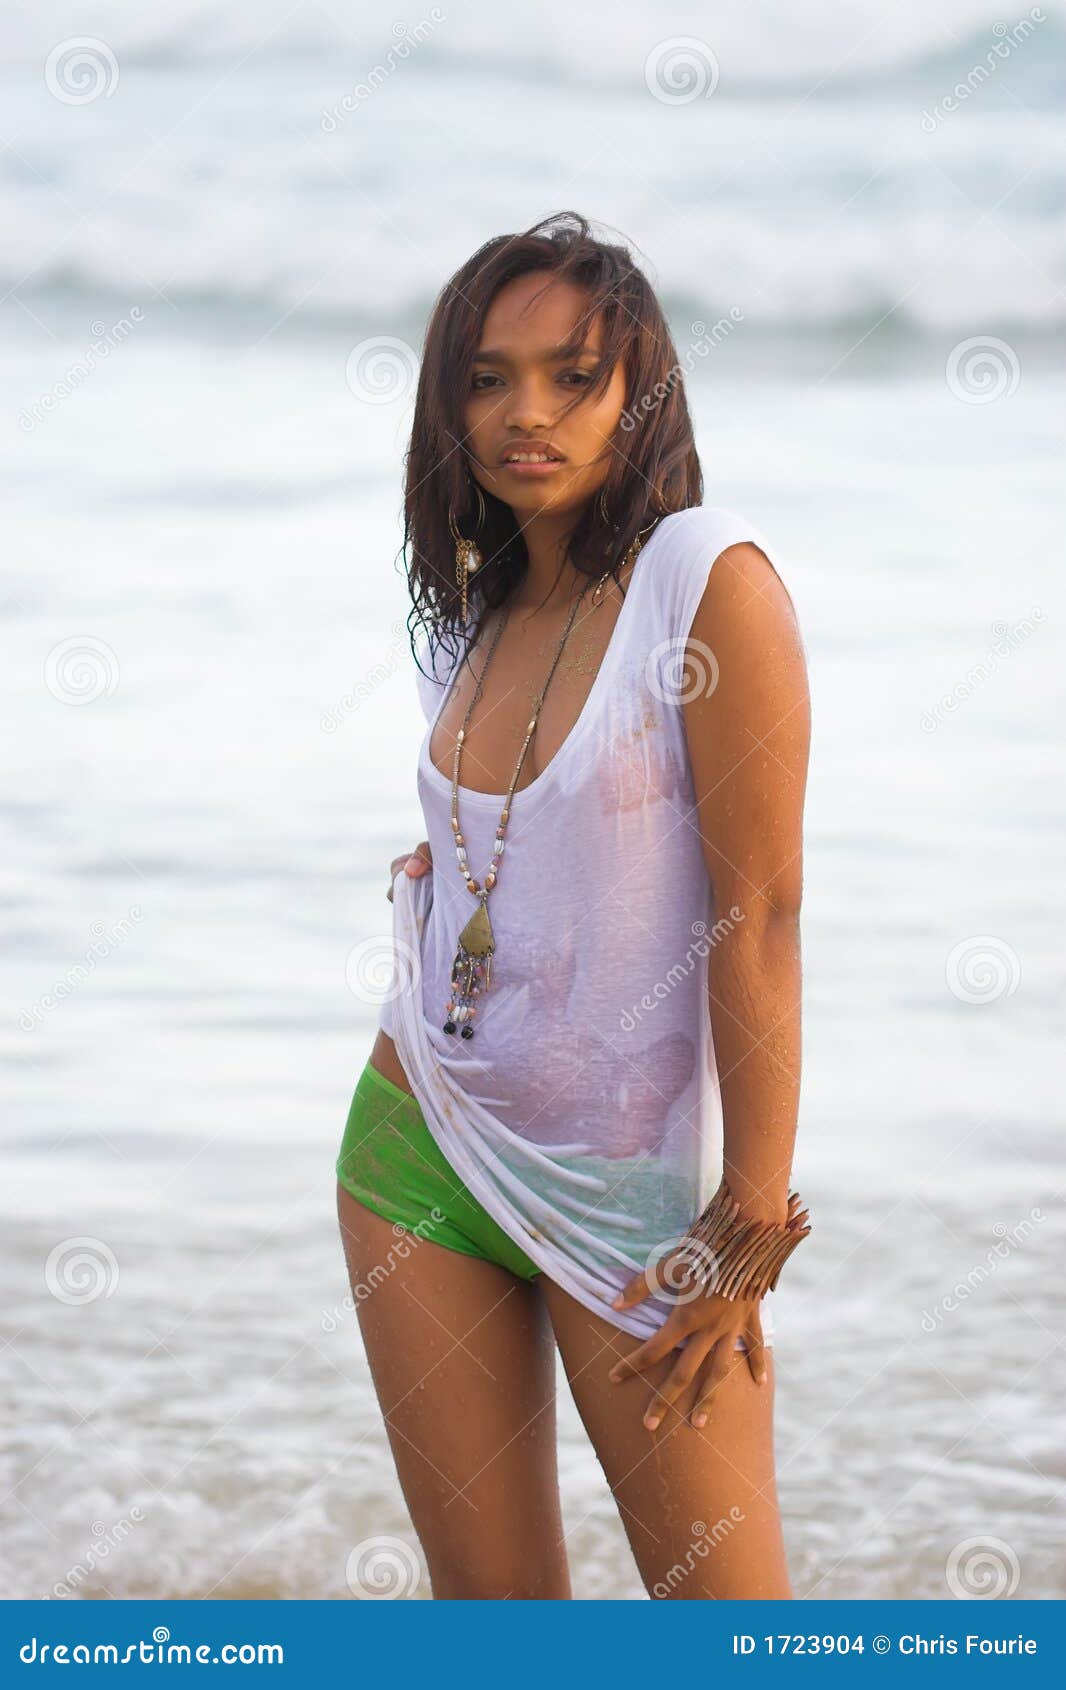 134 Wet Shirt Teen Stock Photos - Free Royalty-Free Stock Photos from Dreamstime